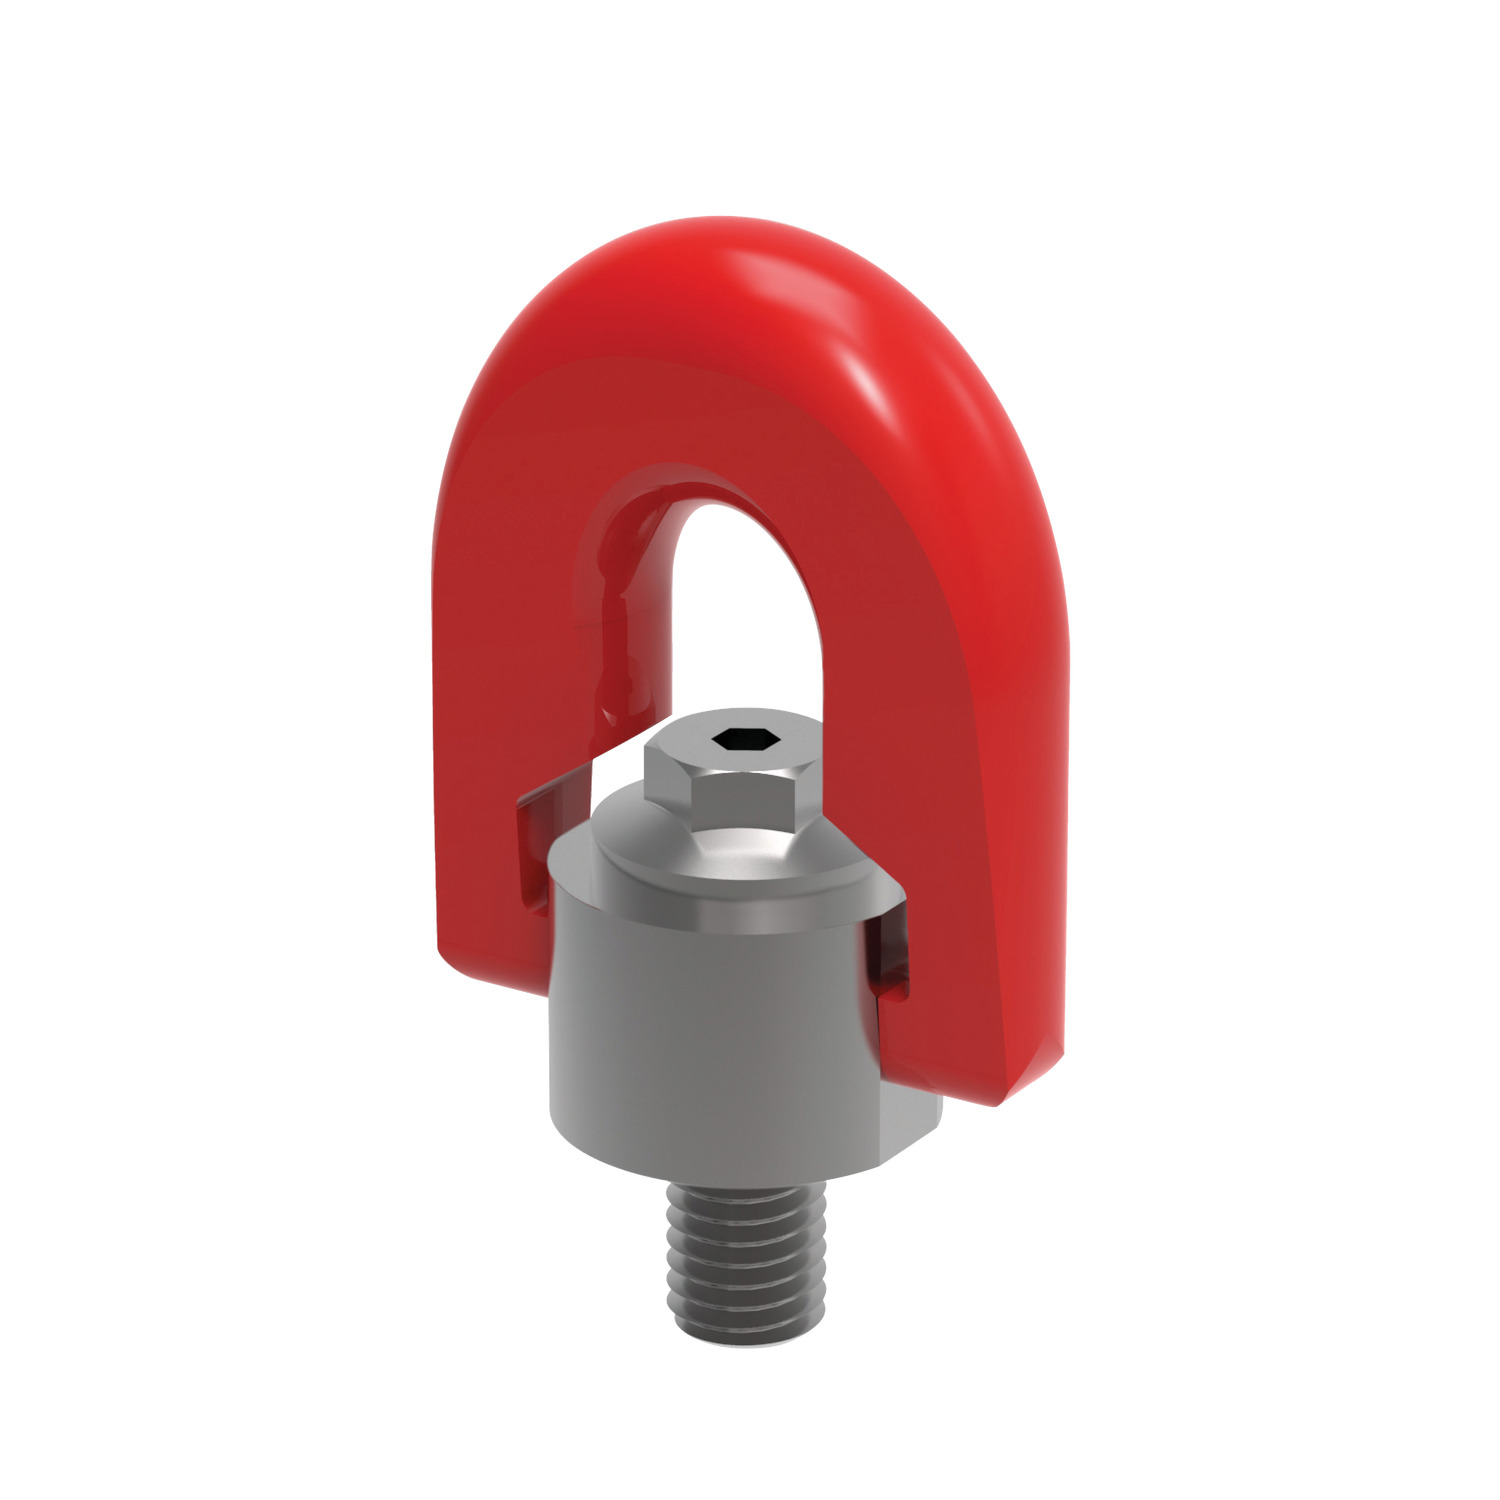 P4012 Double Swivel Lifting Points